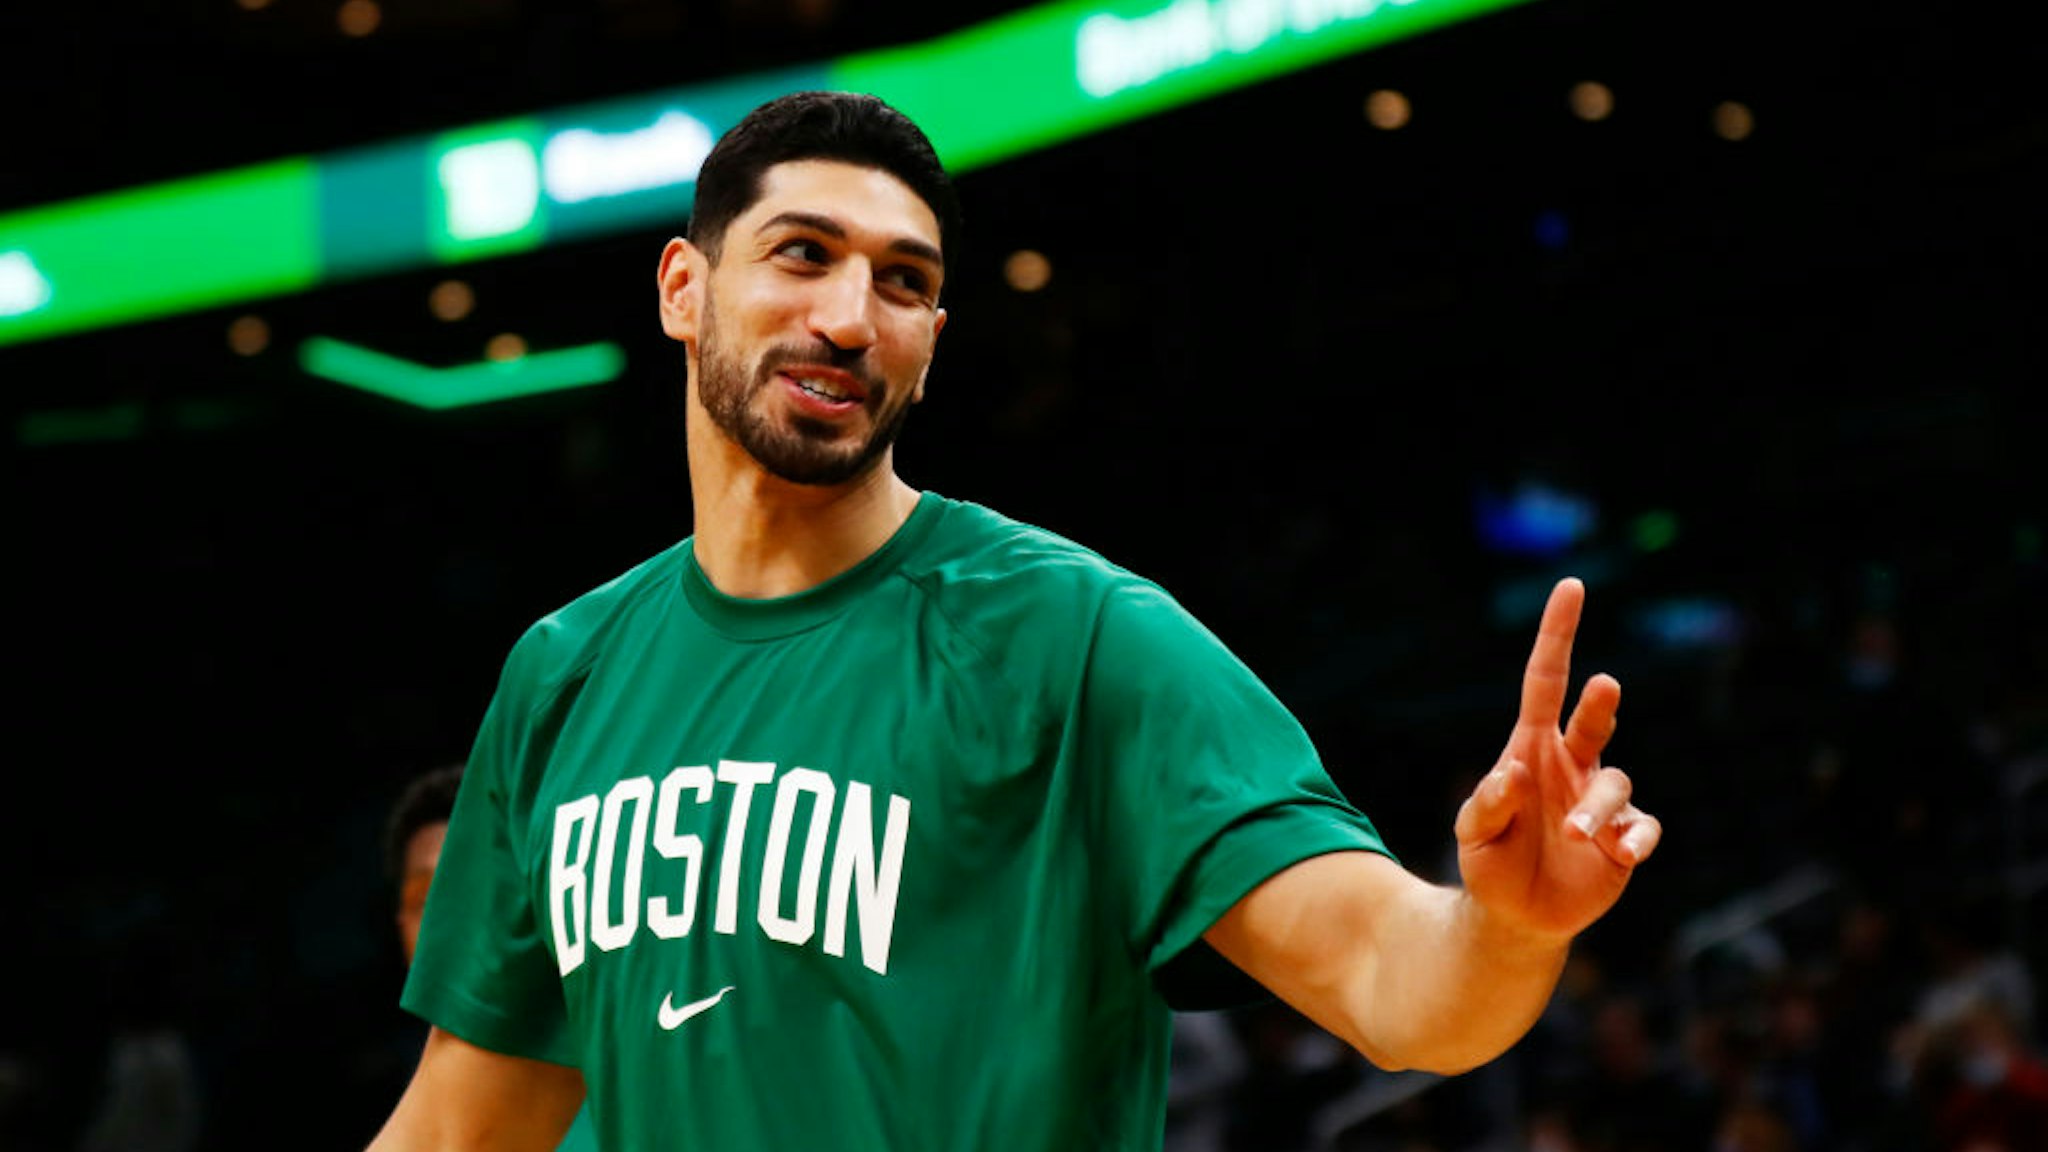 BOSTON, MASSACHUSETTS - OCTOBER 27: Enes Kanter #13 of the Boston Celtics reacts before the game against the Washington Wizards at TD Garden on October 27, 2021 in Boston, Massachusetts. NOTE TO USER: User expressly acknowledges and agrees that, by downloading and or using this photograph, User is consenting to the terms and conditions of the Getty Images License Agreement. (Photo by Omar Rawlings/Getty Images)